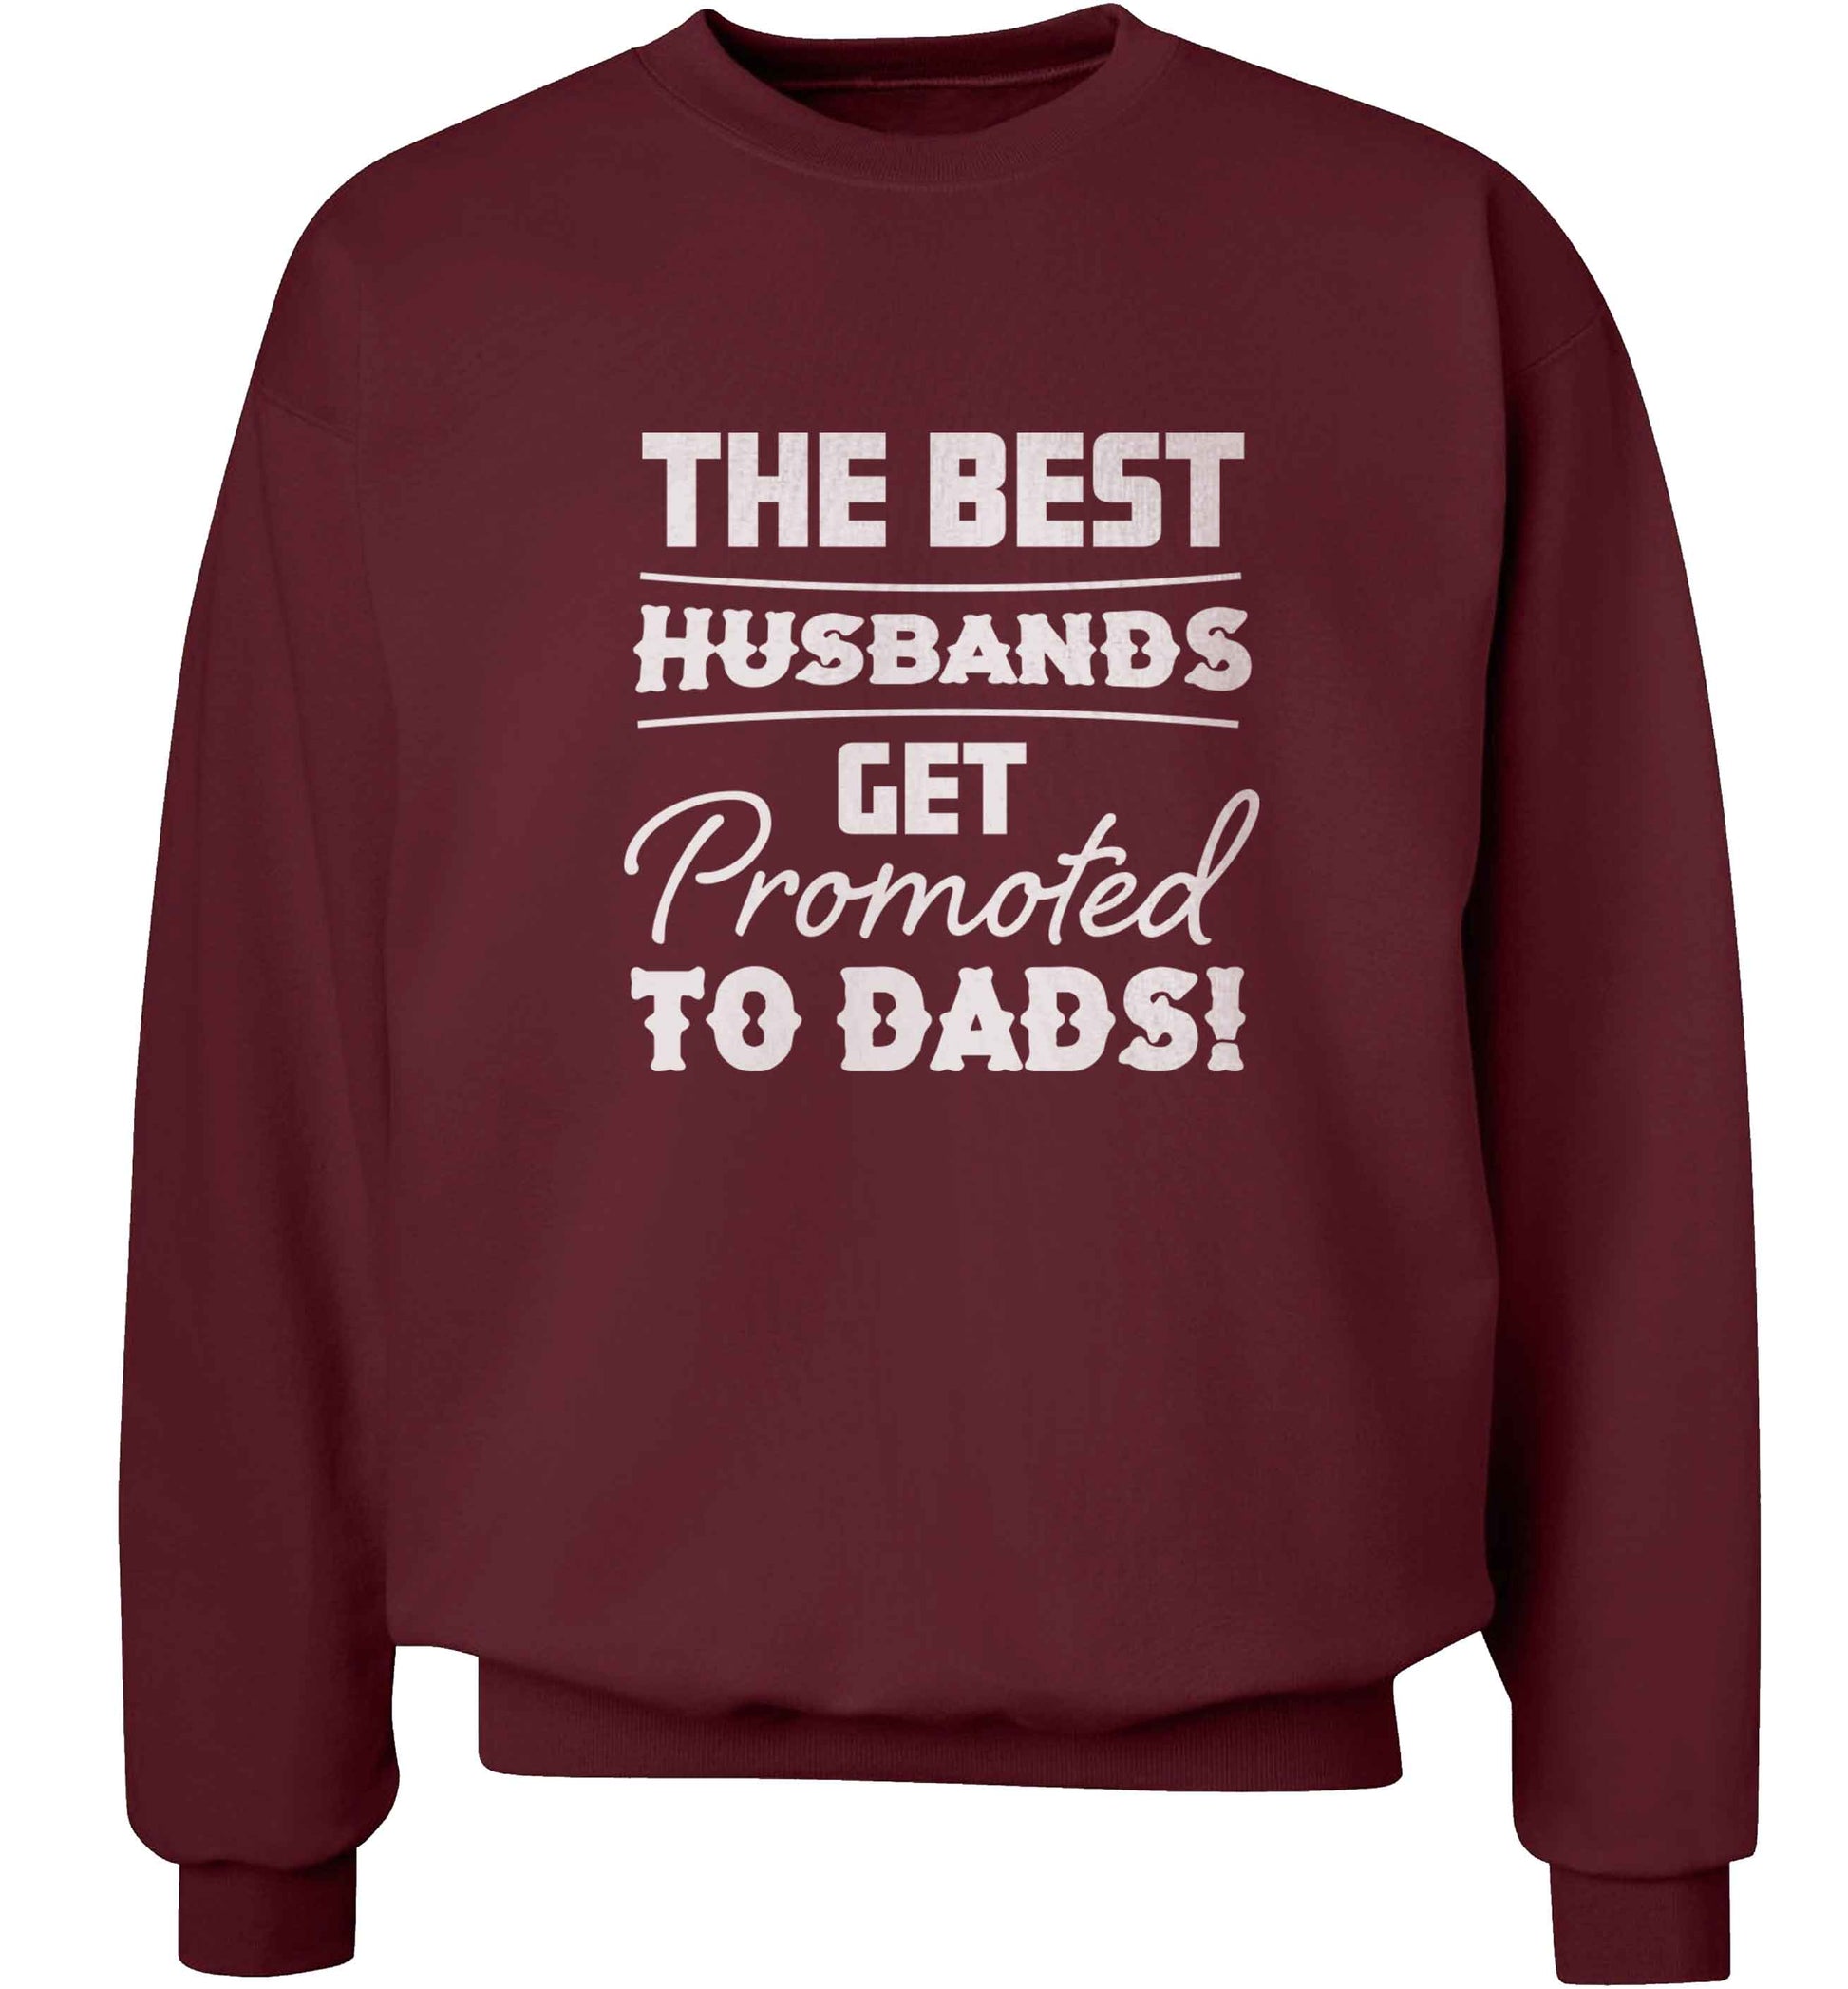 The best husbands get promoted to Dads adult's unisex maroon sweater 2XL